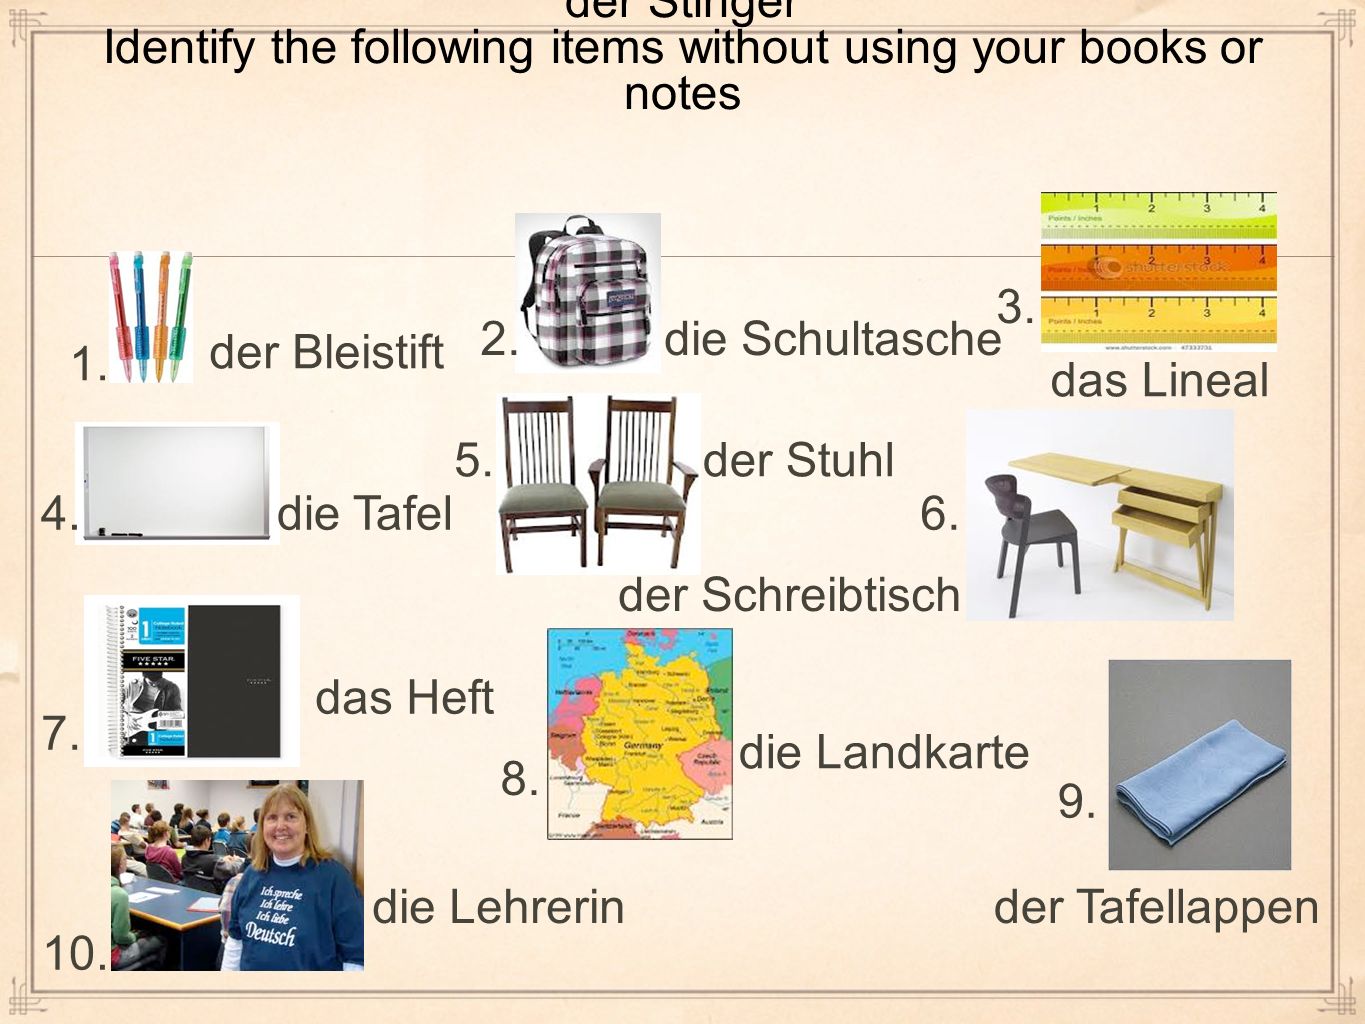 der Stinger Identify the following items without using your books or notes